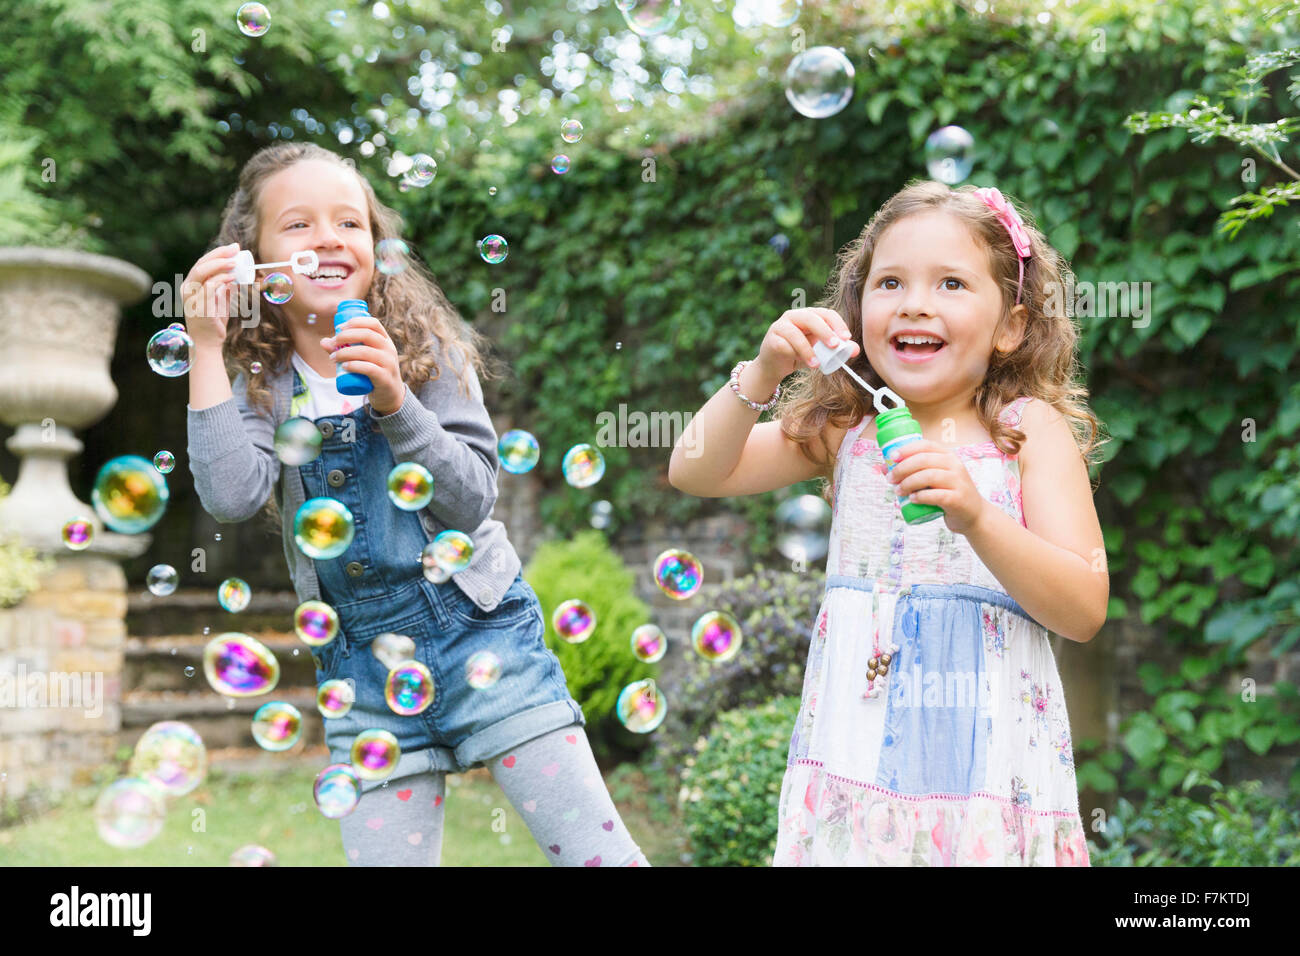 Carefree girls blowing bubbles in backyard Stock Photo